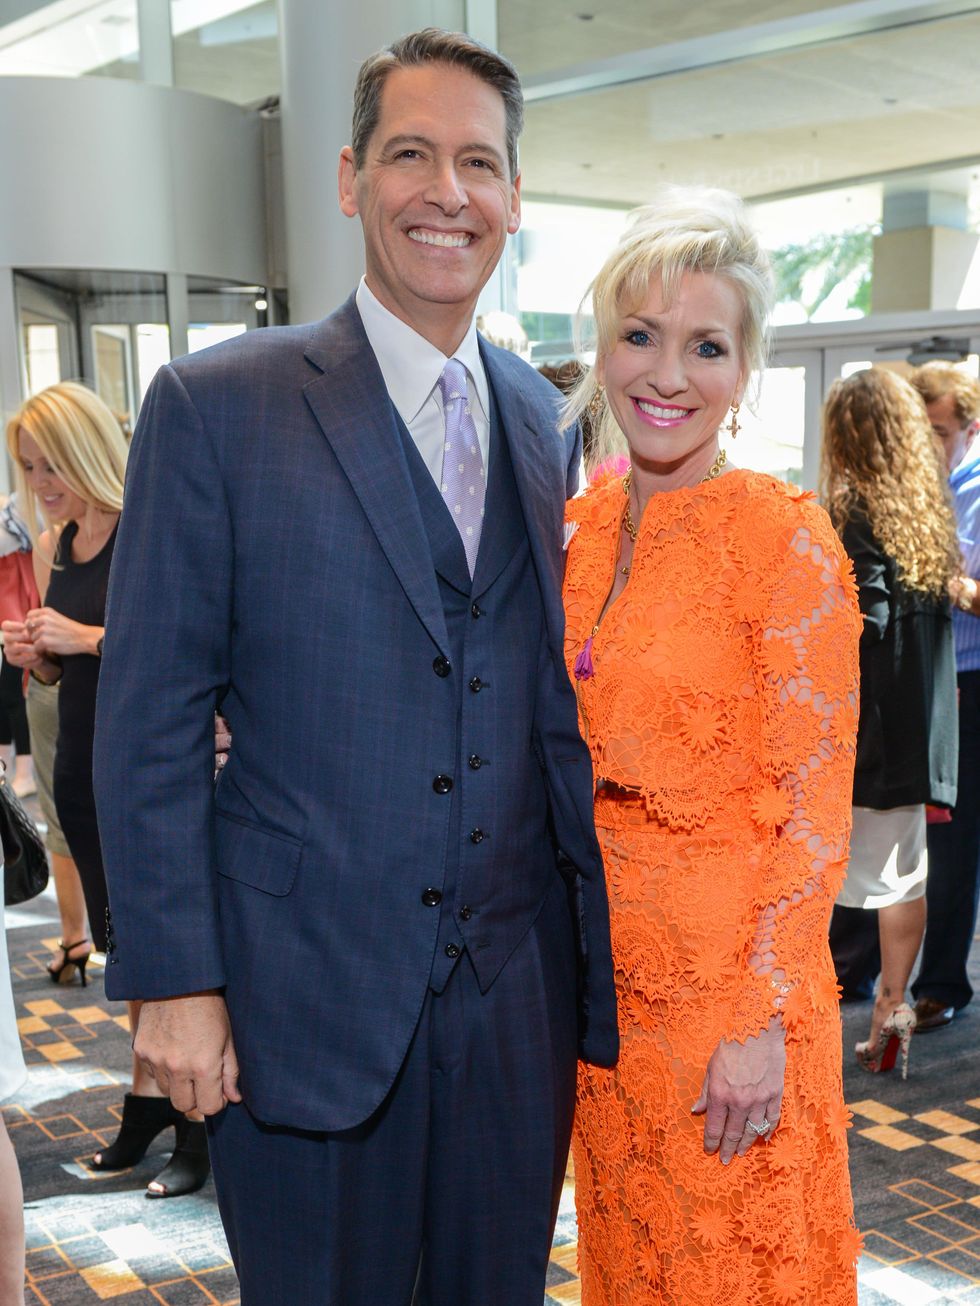 Neiman Marcus' New GM is a Handsome Surprise for the Houston Symphony League